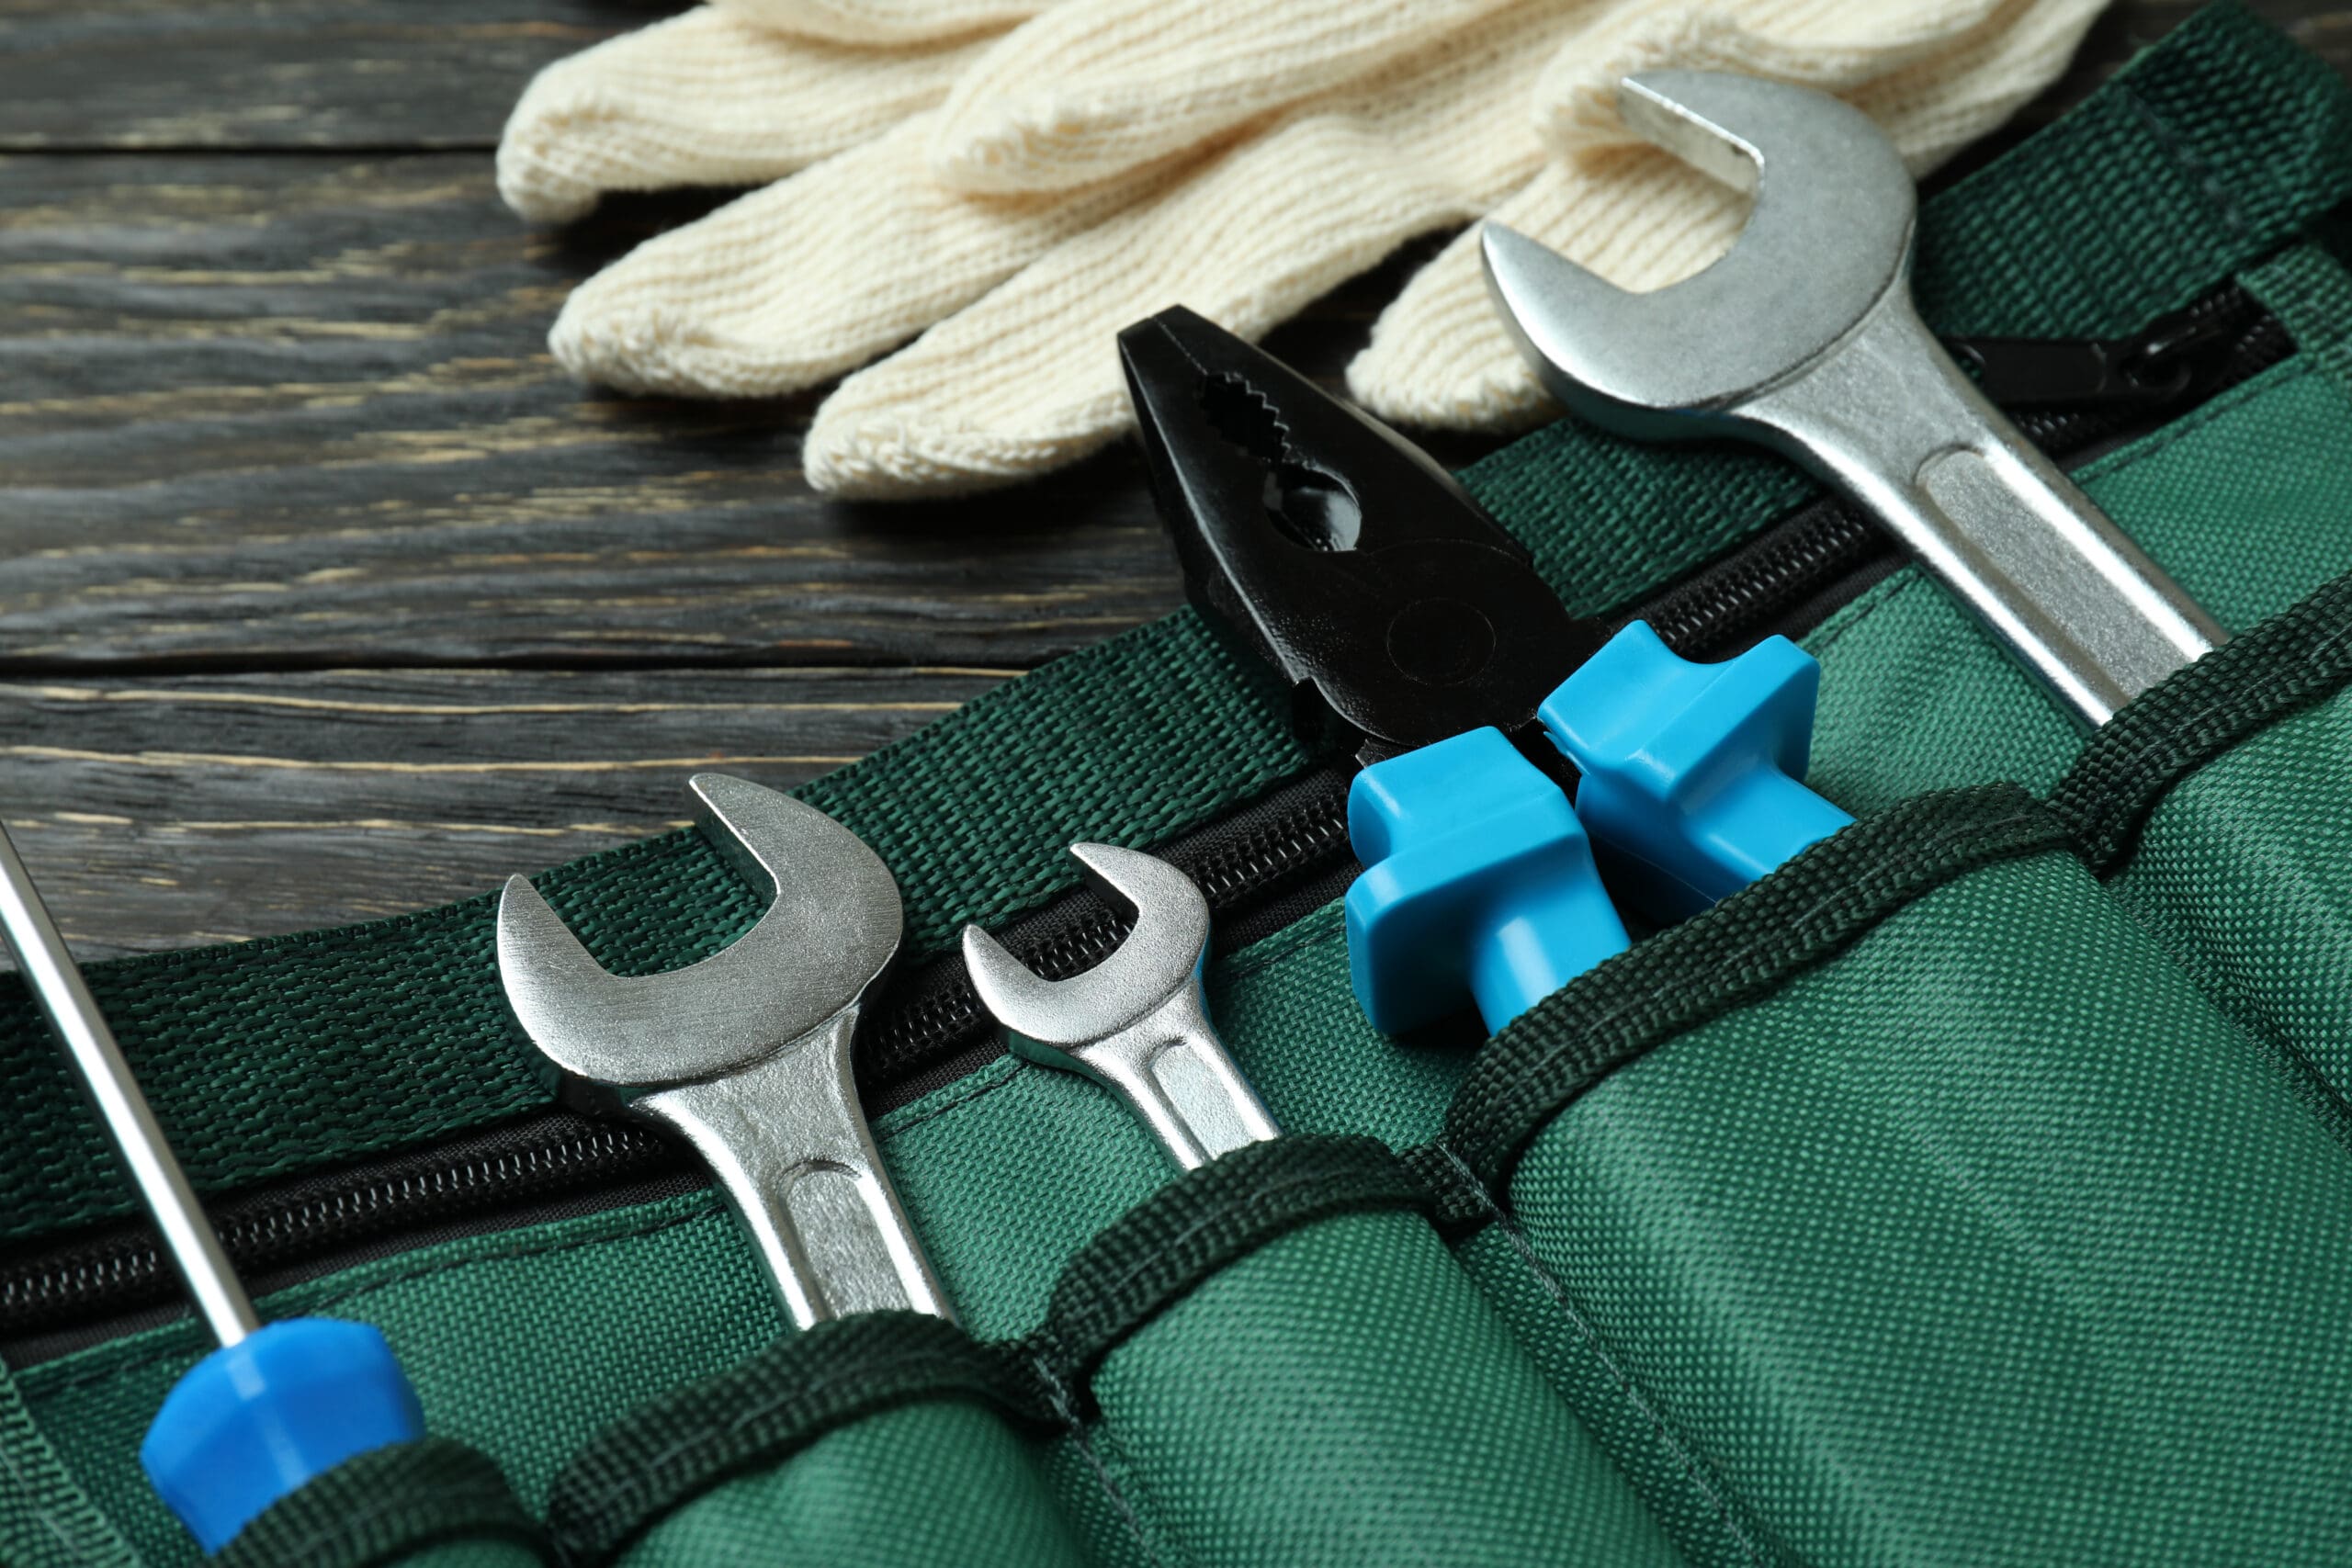 Home Improvements: DIY or Hire a Professional? How to Make the Right Choice